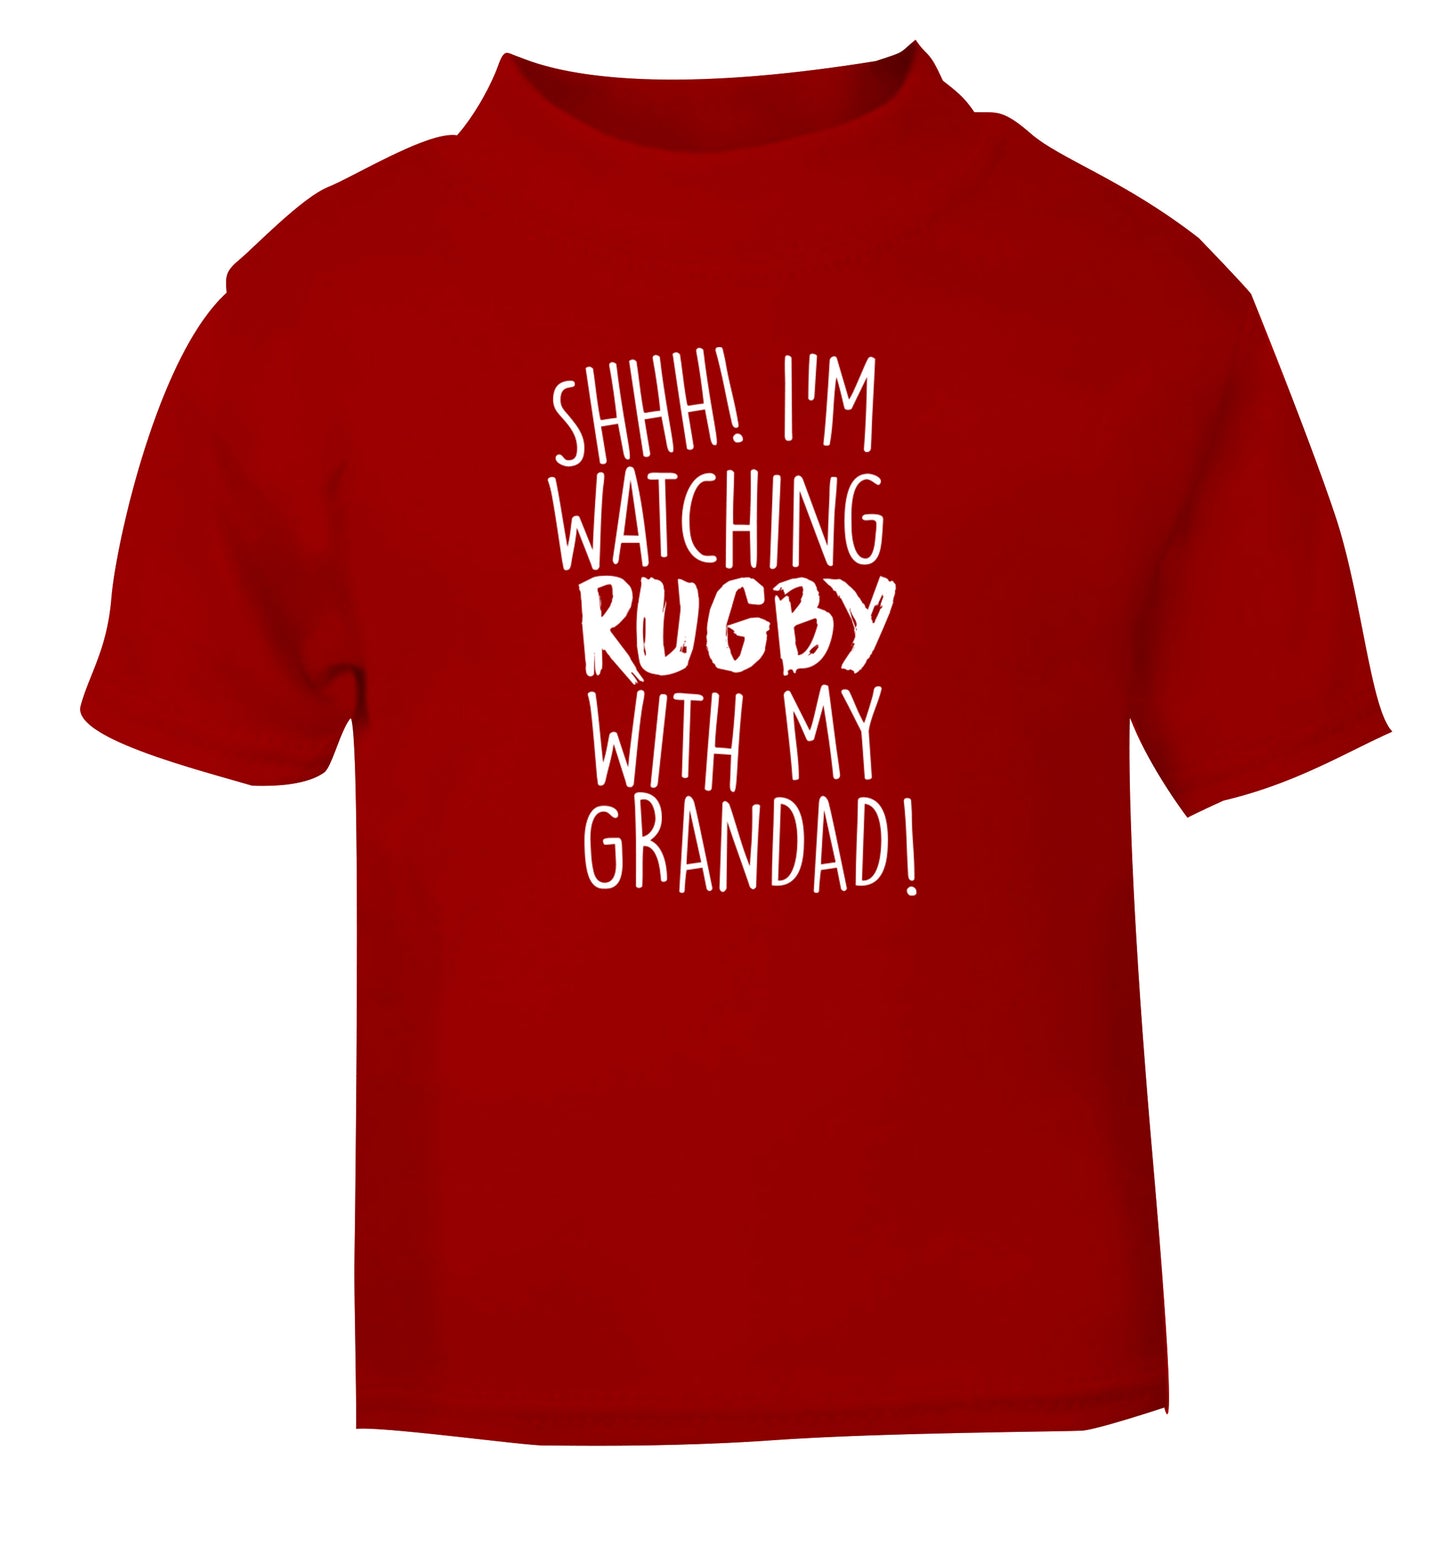 Shh I'm watching rugby with my grandad red Baby Toddler Tshirt 2 Years